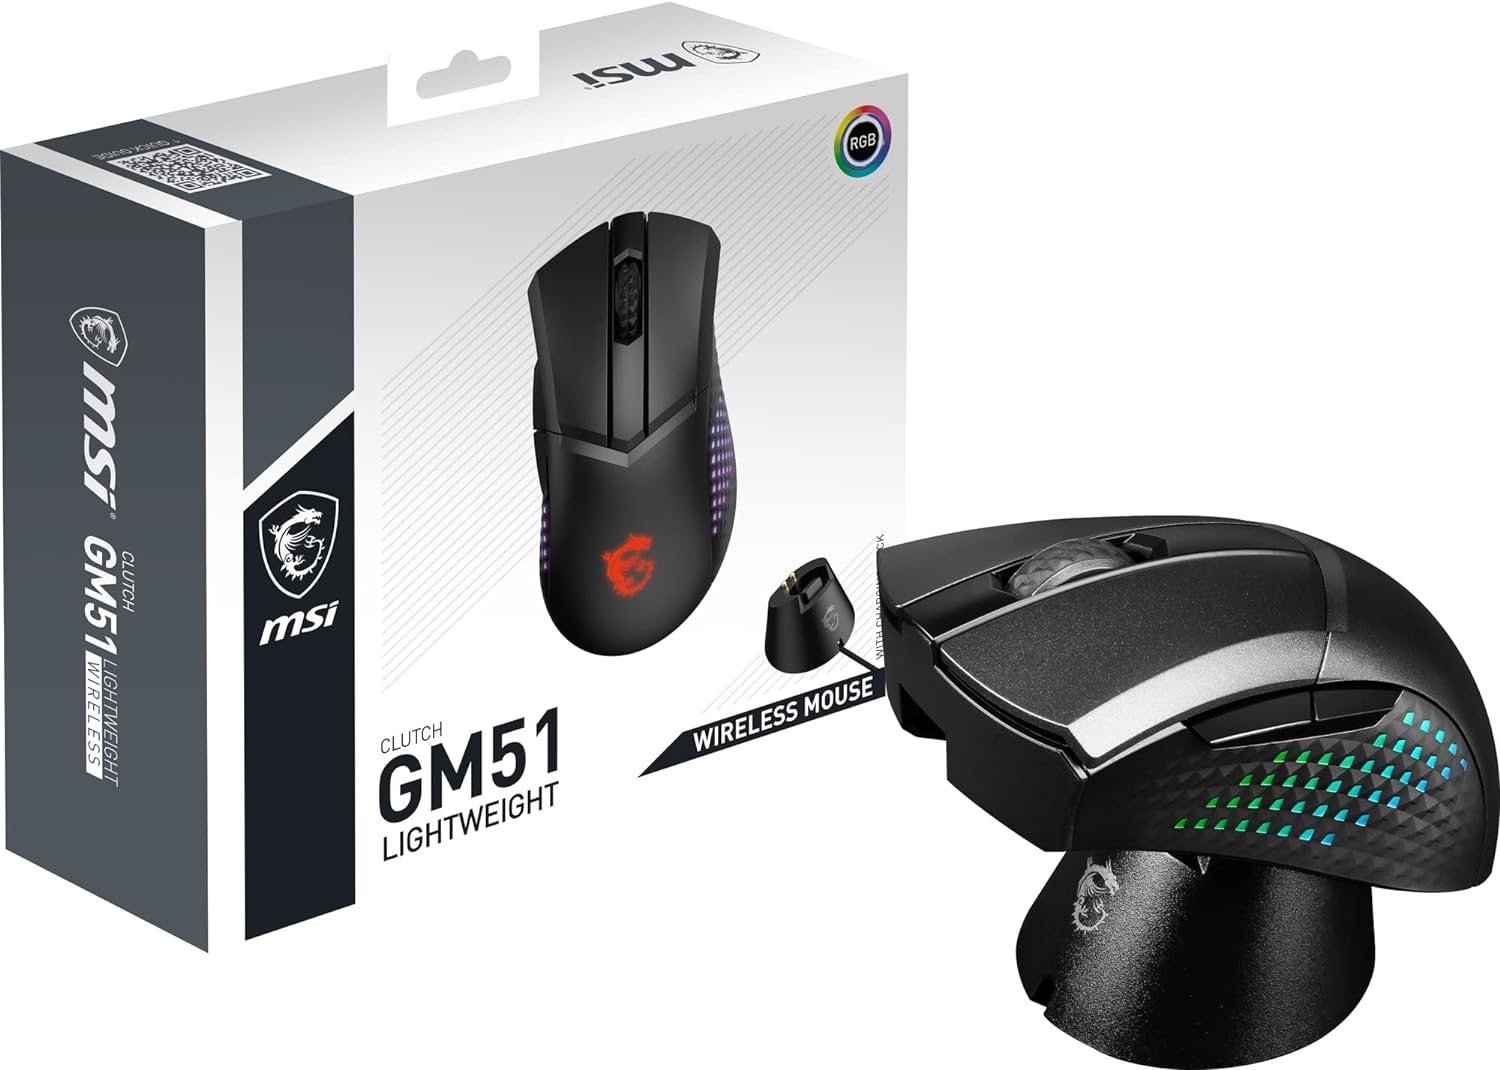 MSI MOUSE CLUTCH GM51 LIGHTWEIGHT